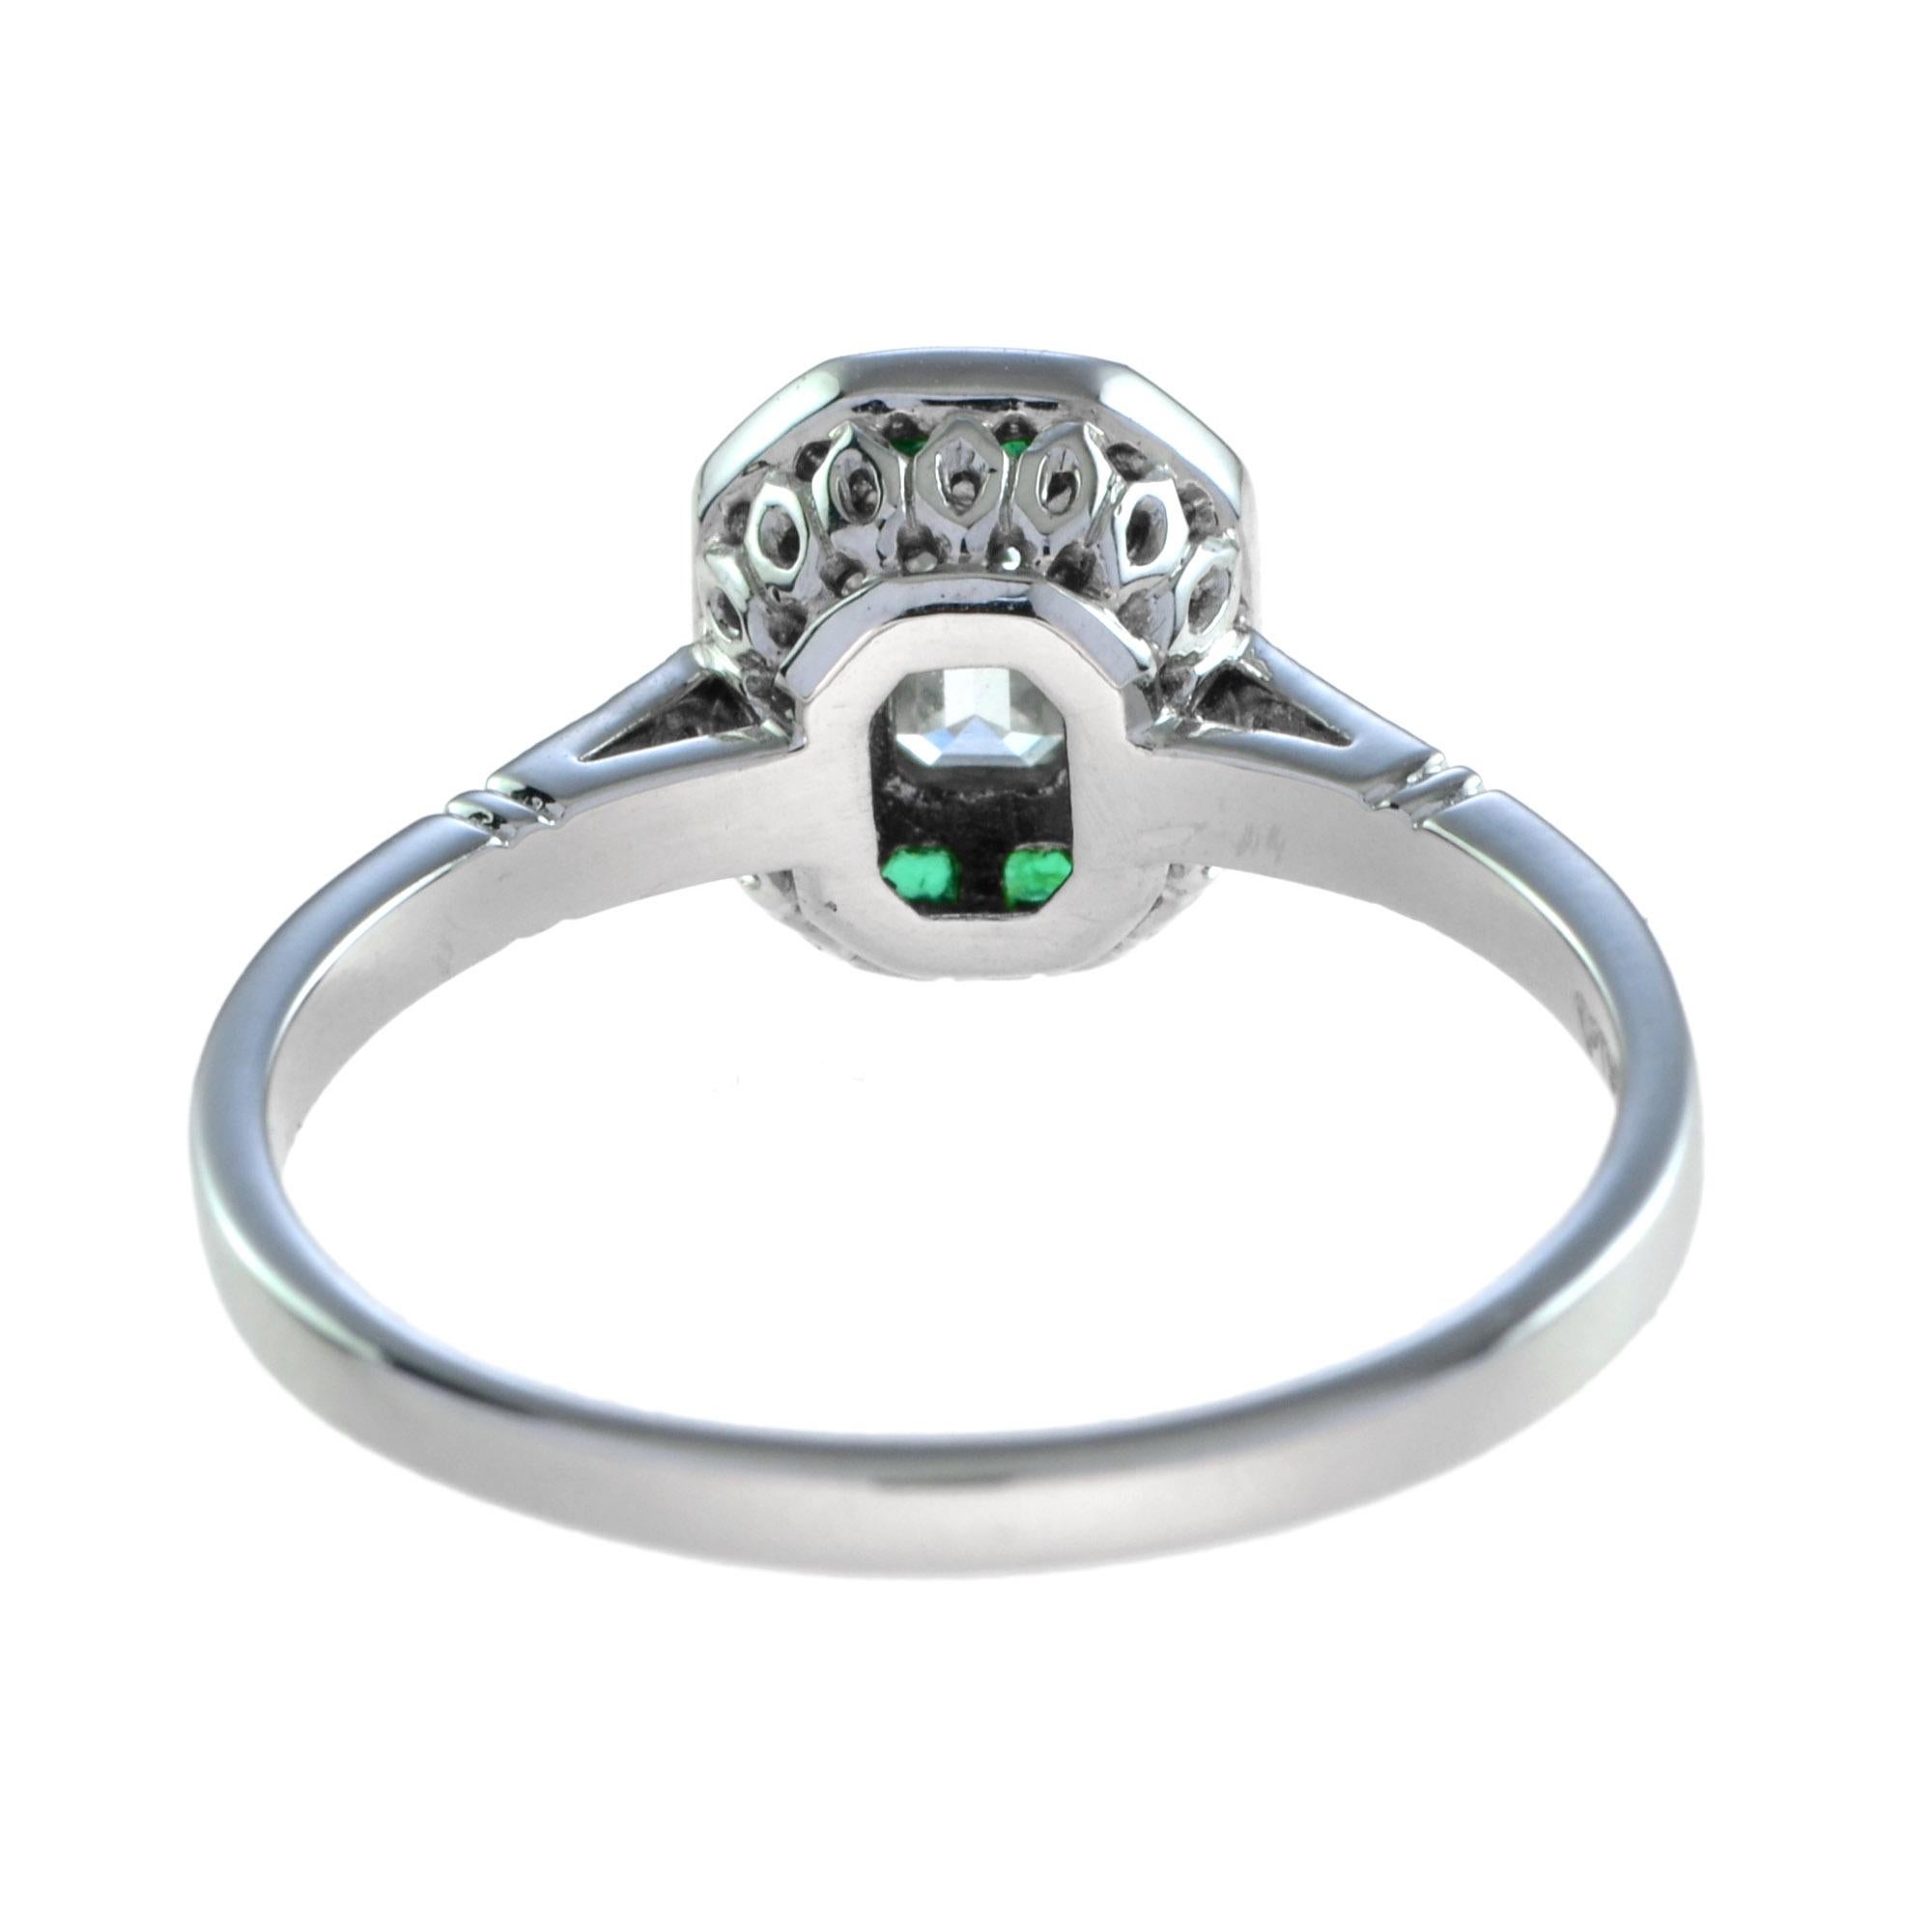 For Sale:  Emerald Cut Diamond and Emerald Art Deco Style Engagement Ring in 18K White Gold 5